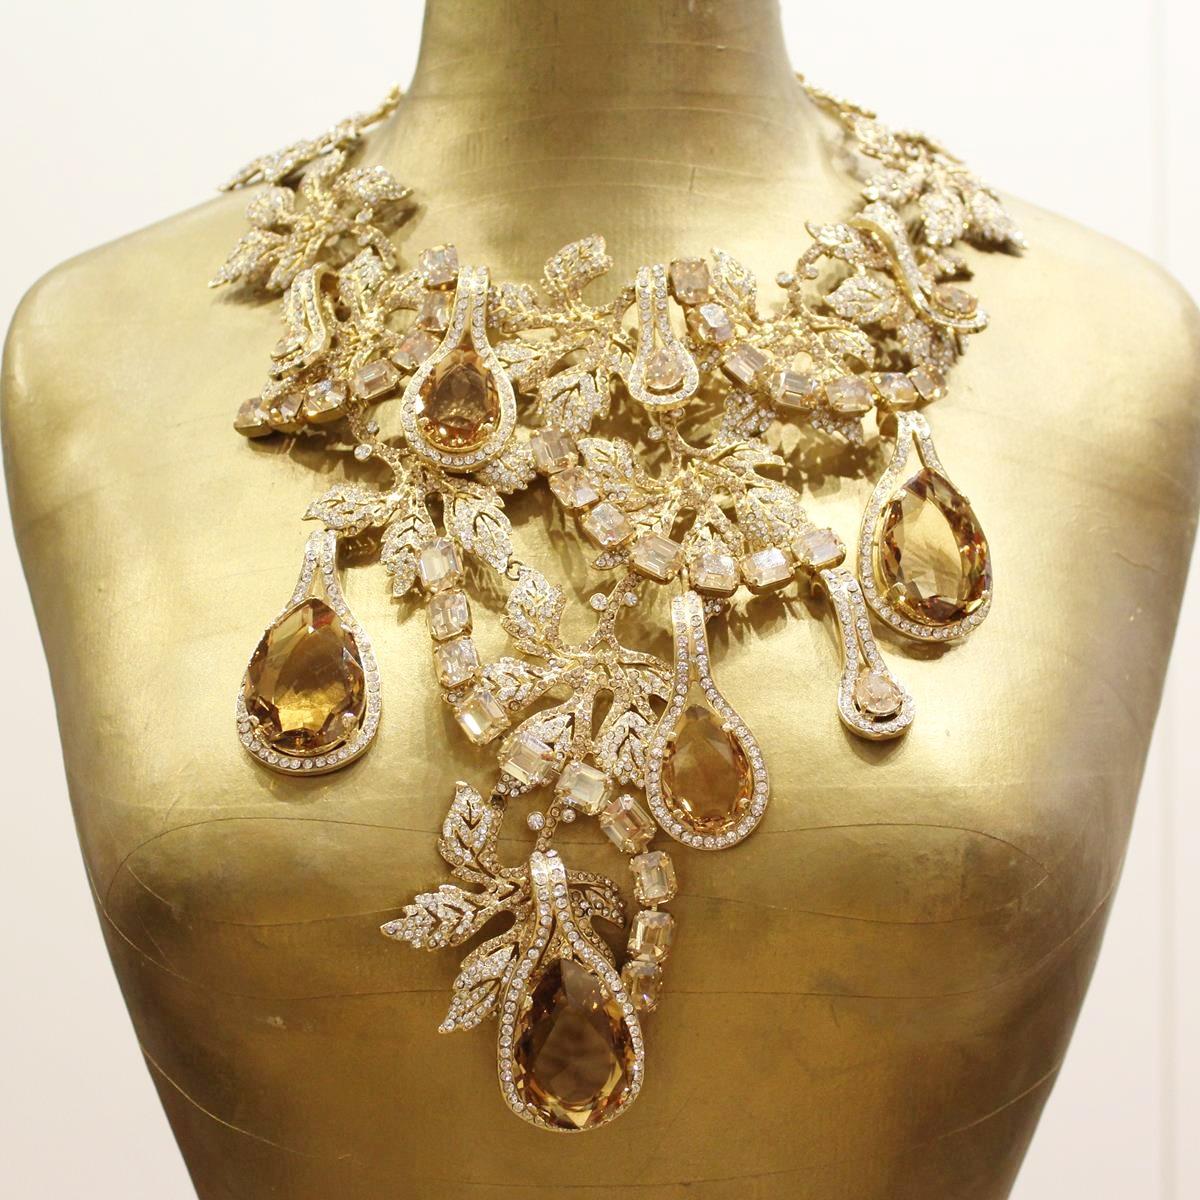 Fantastic masterpiece by Carlo Zini
One of the world greatest bijoux designers
Large collier, completely handmade
Magnificent construction on swarovski crystals and champagne tailor cut glasses
Zyrcons
100% Artisanal work made in Milano
Piece with